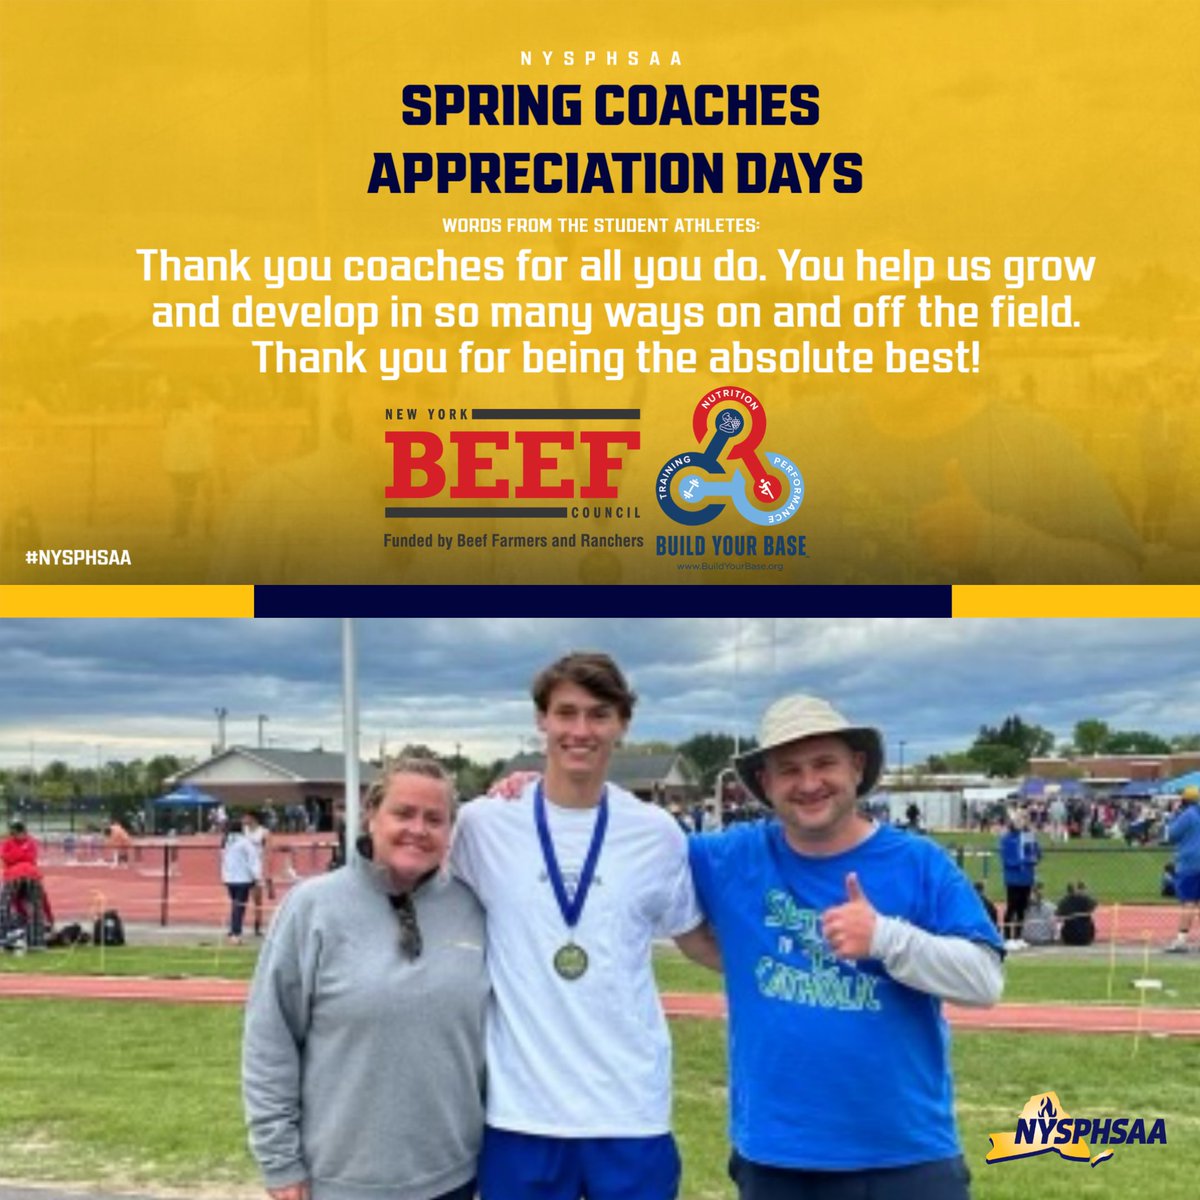 SPRING COACHES APPRECIATION DAYS! 🌷

Presented by @NYBeefCouncil 

We salute the coaches that commit their time to #NYSPHSAA athletes well before the snow starts to melt. Your impact is immeasurable!

Tell us about your coach, they could win a prize! form.jotform.com/240013938540147